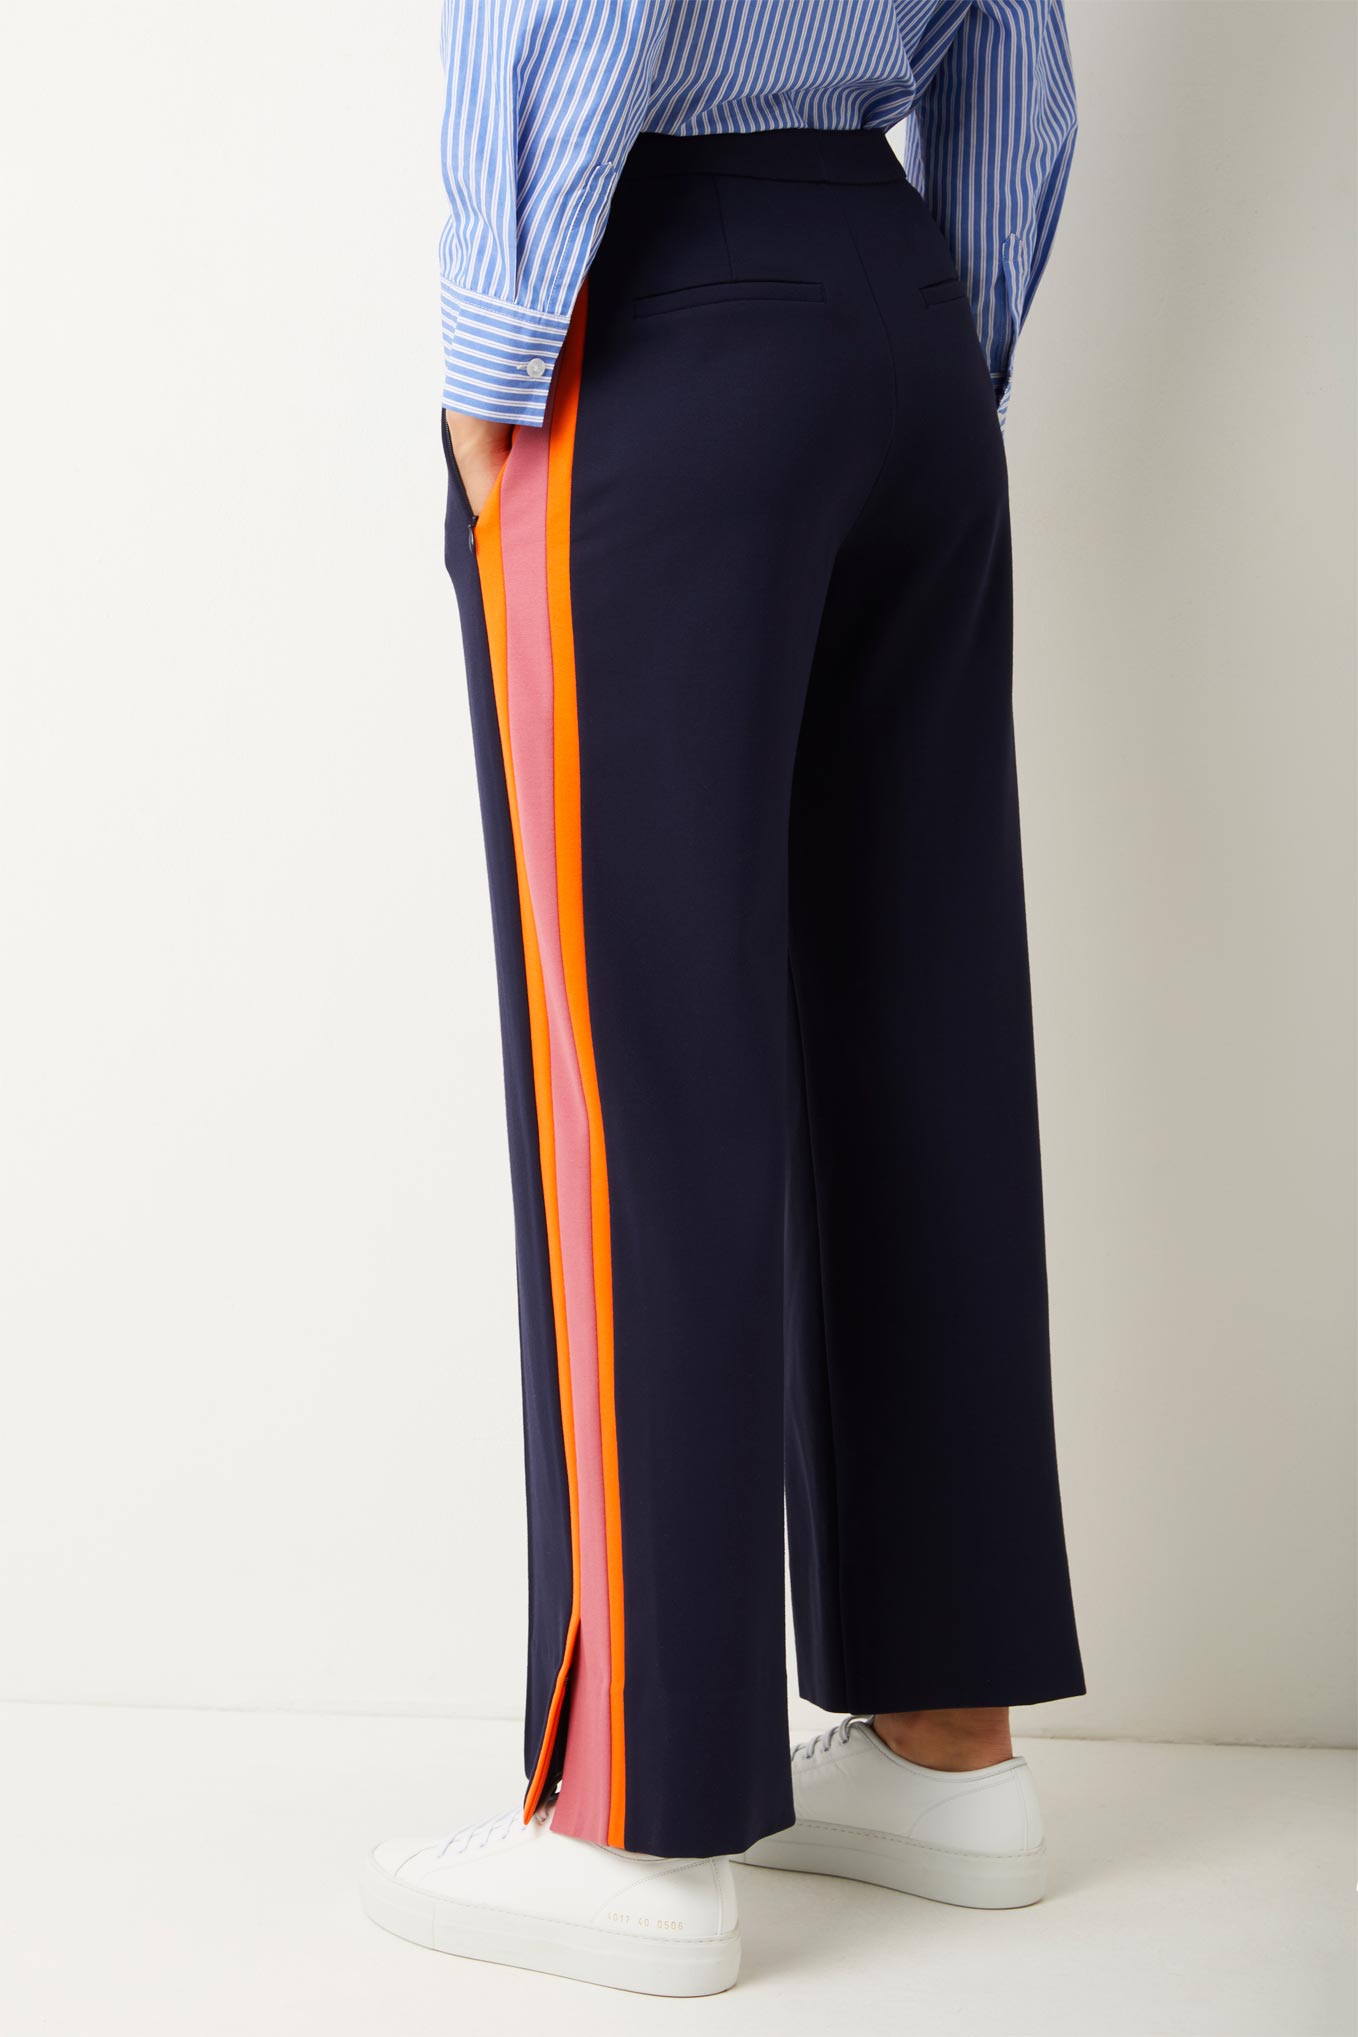 Buy Marks & Spencer Side Stripe Wide Leg Trousers T577671NAVY Mix (XS) at  Amazon.in